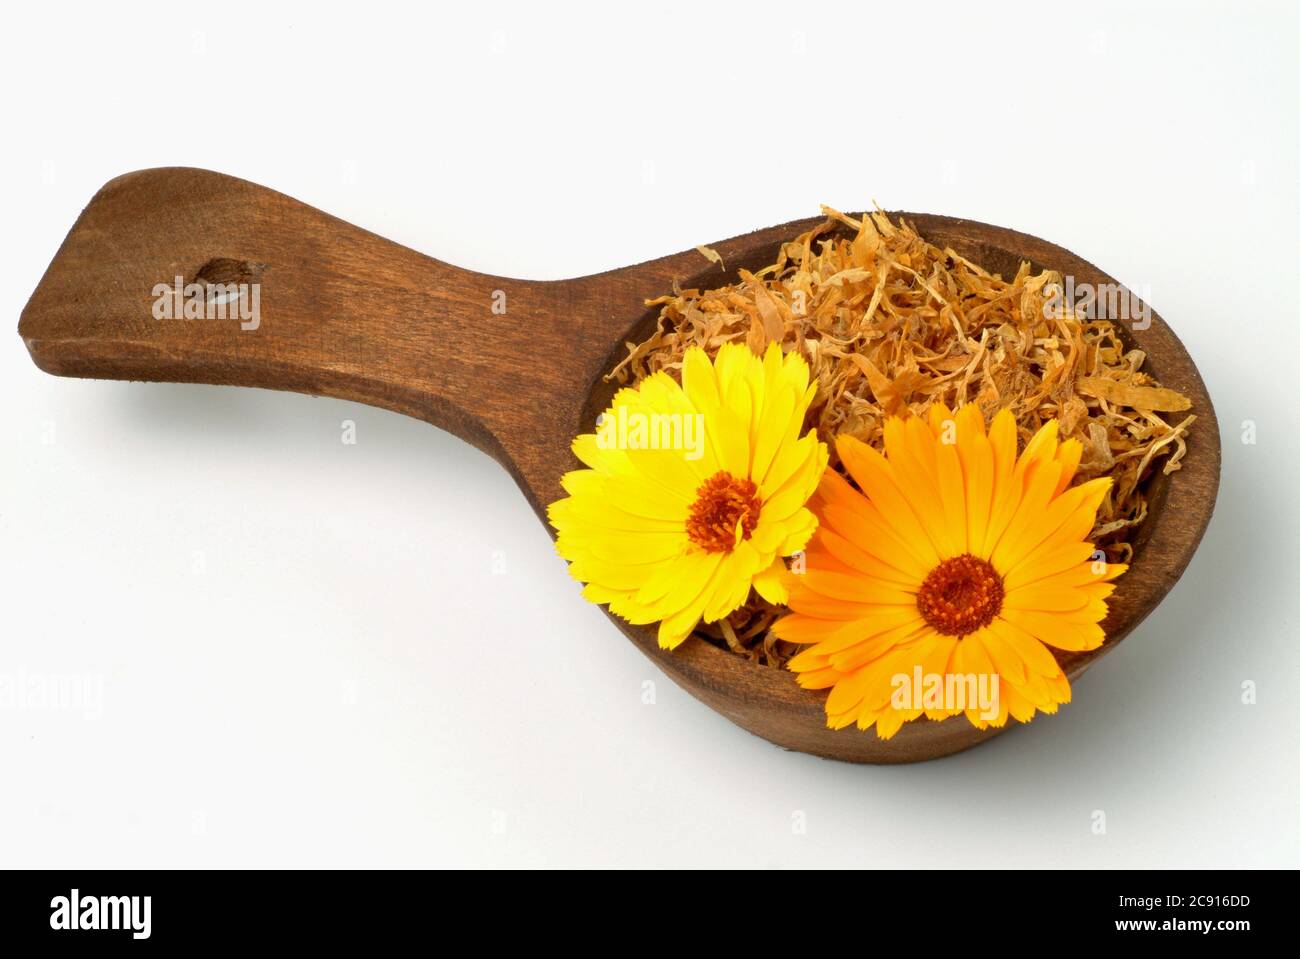 Marigold, Calendula officinalis. Pharmaceutically the dried flower heads are used. The pharmaceutical drug reduces inflammation and promotes the forma Stock Photo